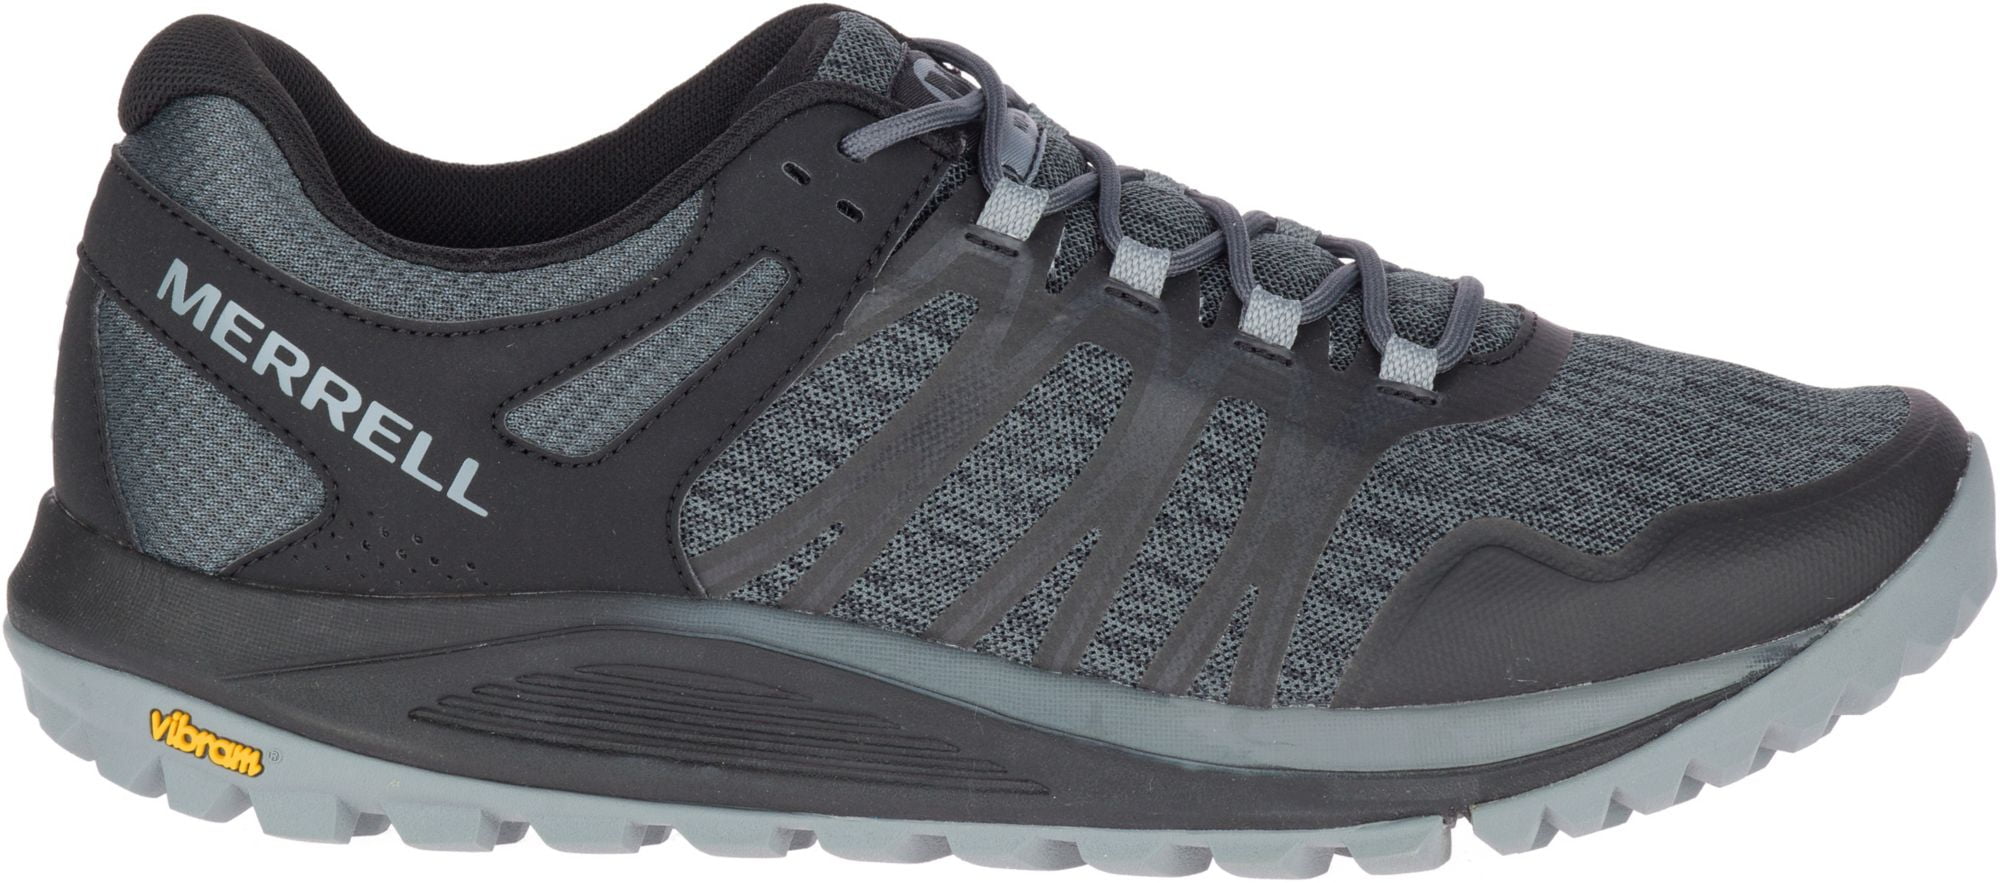 Merrell Mens Nova Trail Running Shoes Trainers Sneakers Grey Sports Breathable 